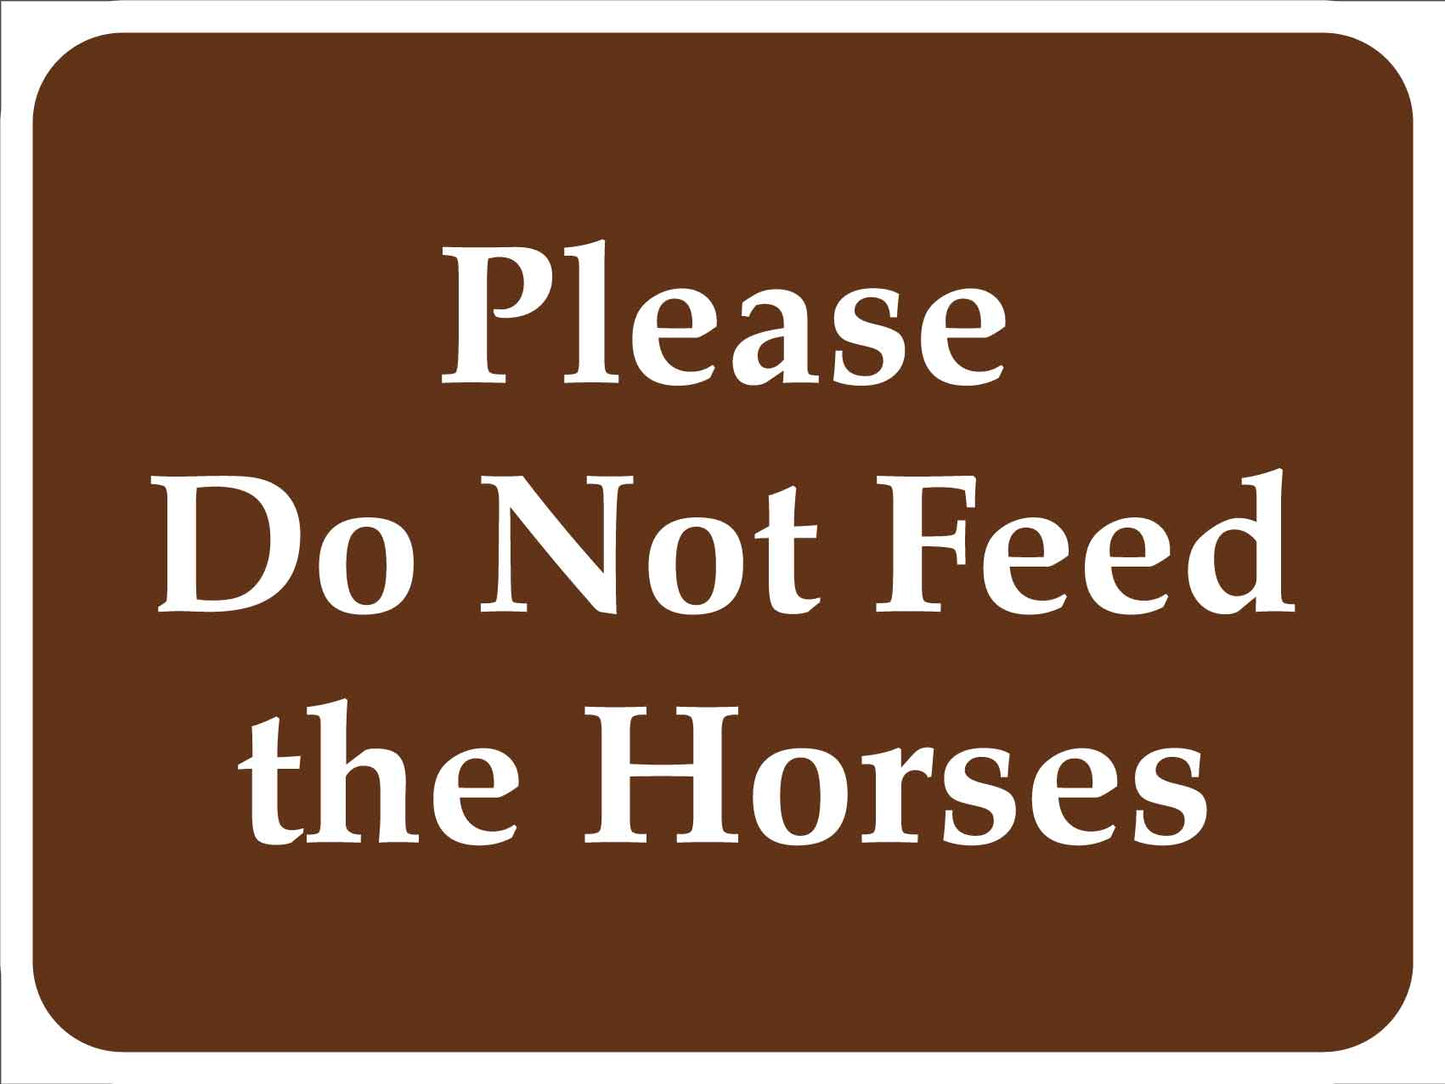 Please Do Not Feed the Horses Brown Sign